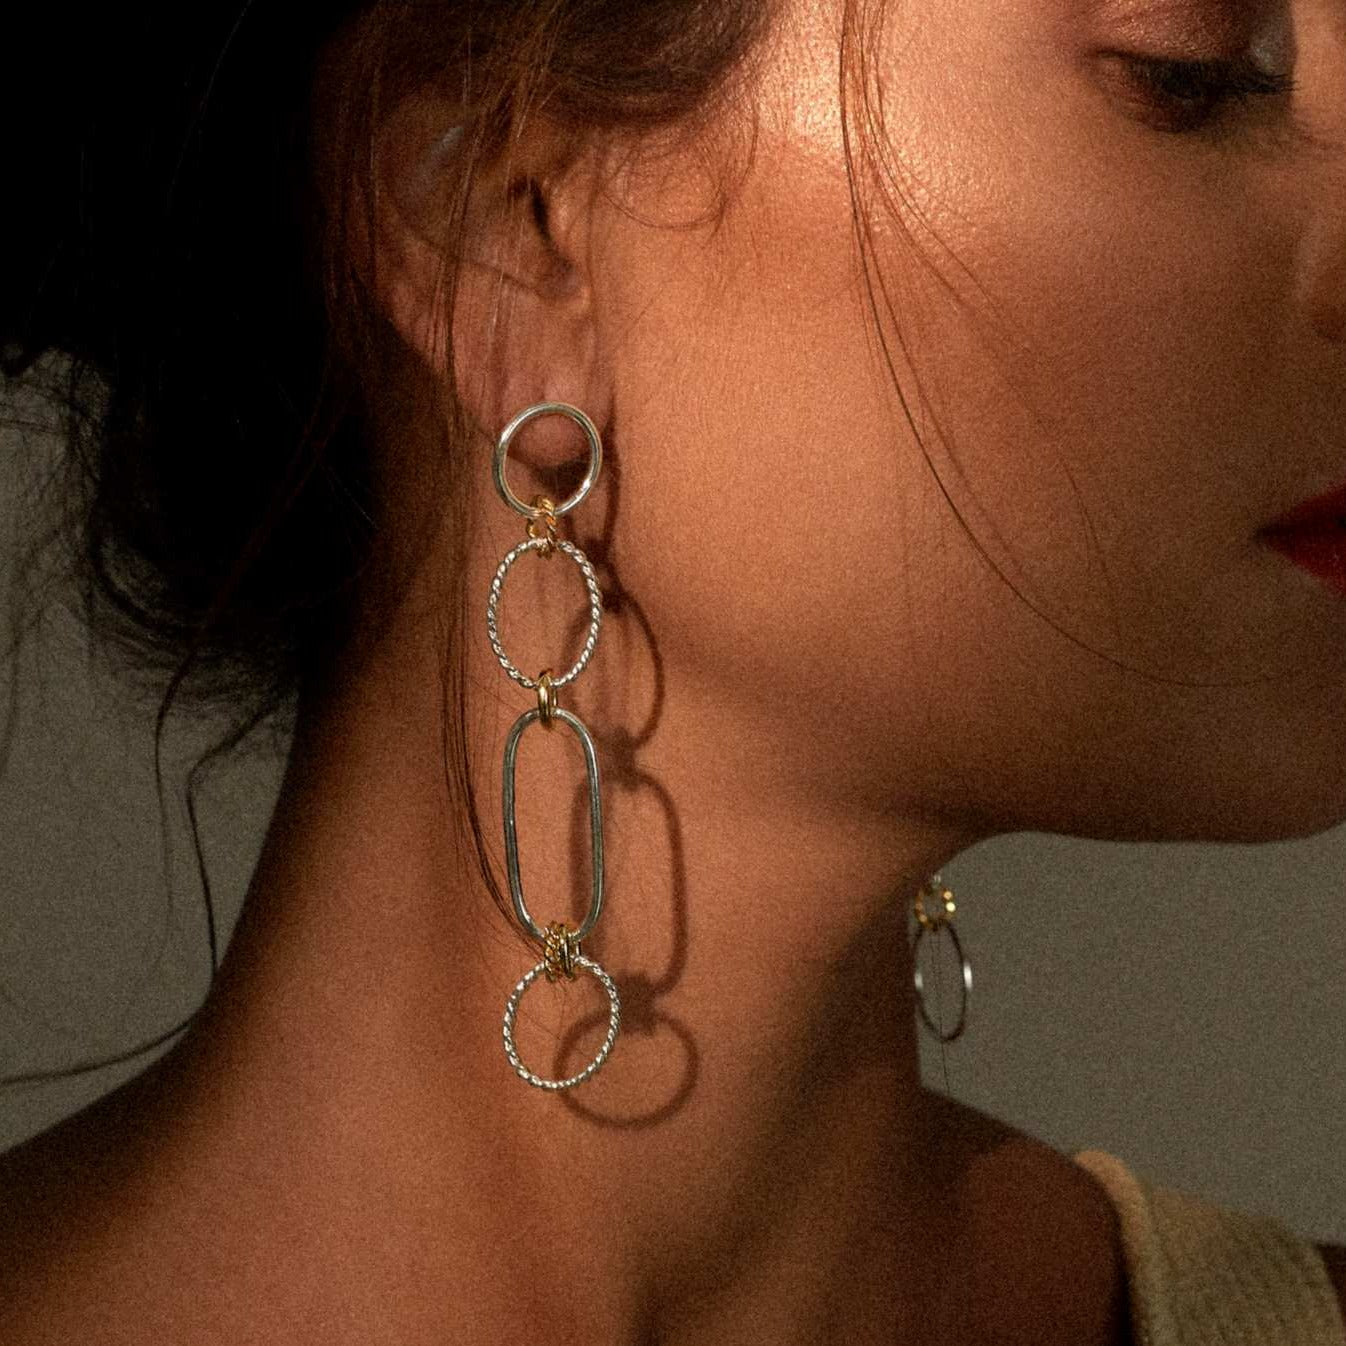 Connected Earrings / silver